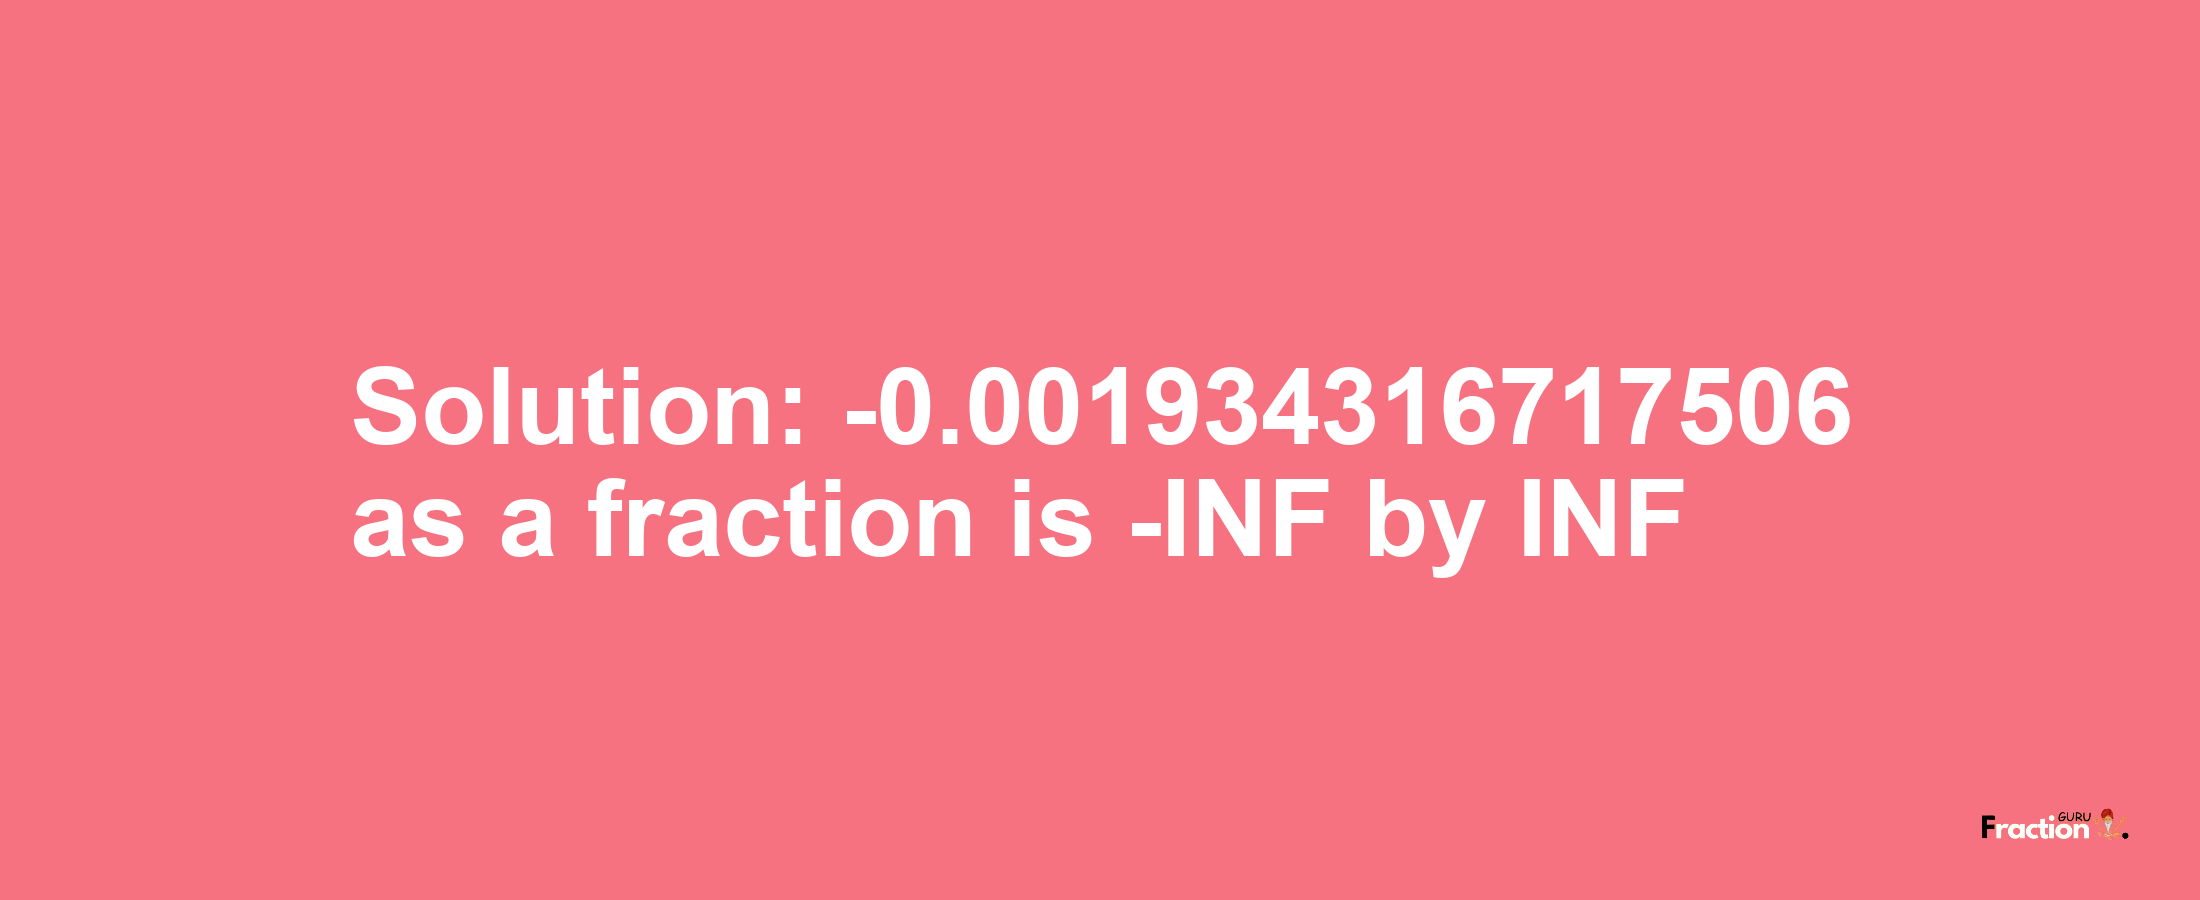 Solution:-0.001934316717506 as a fraction is -INF/INF